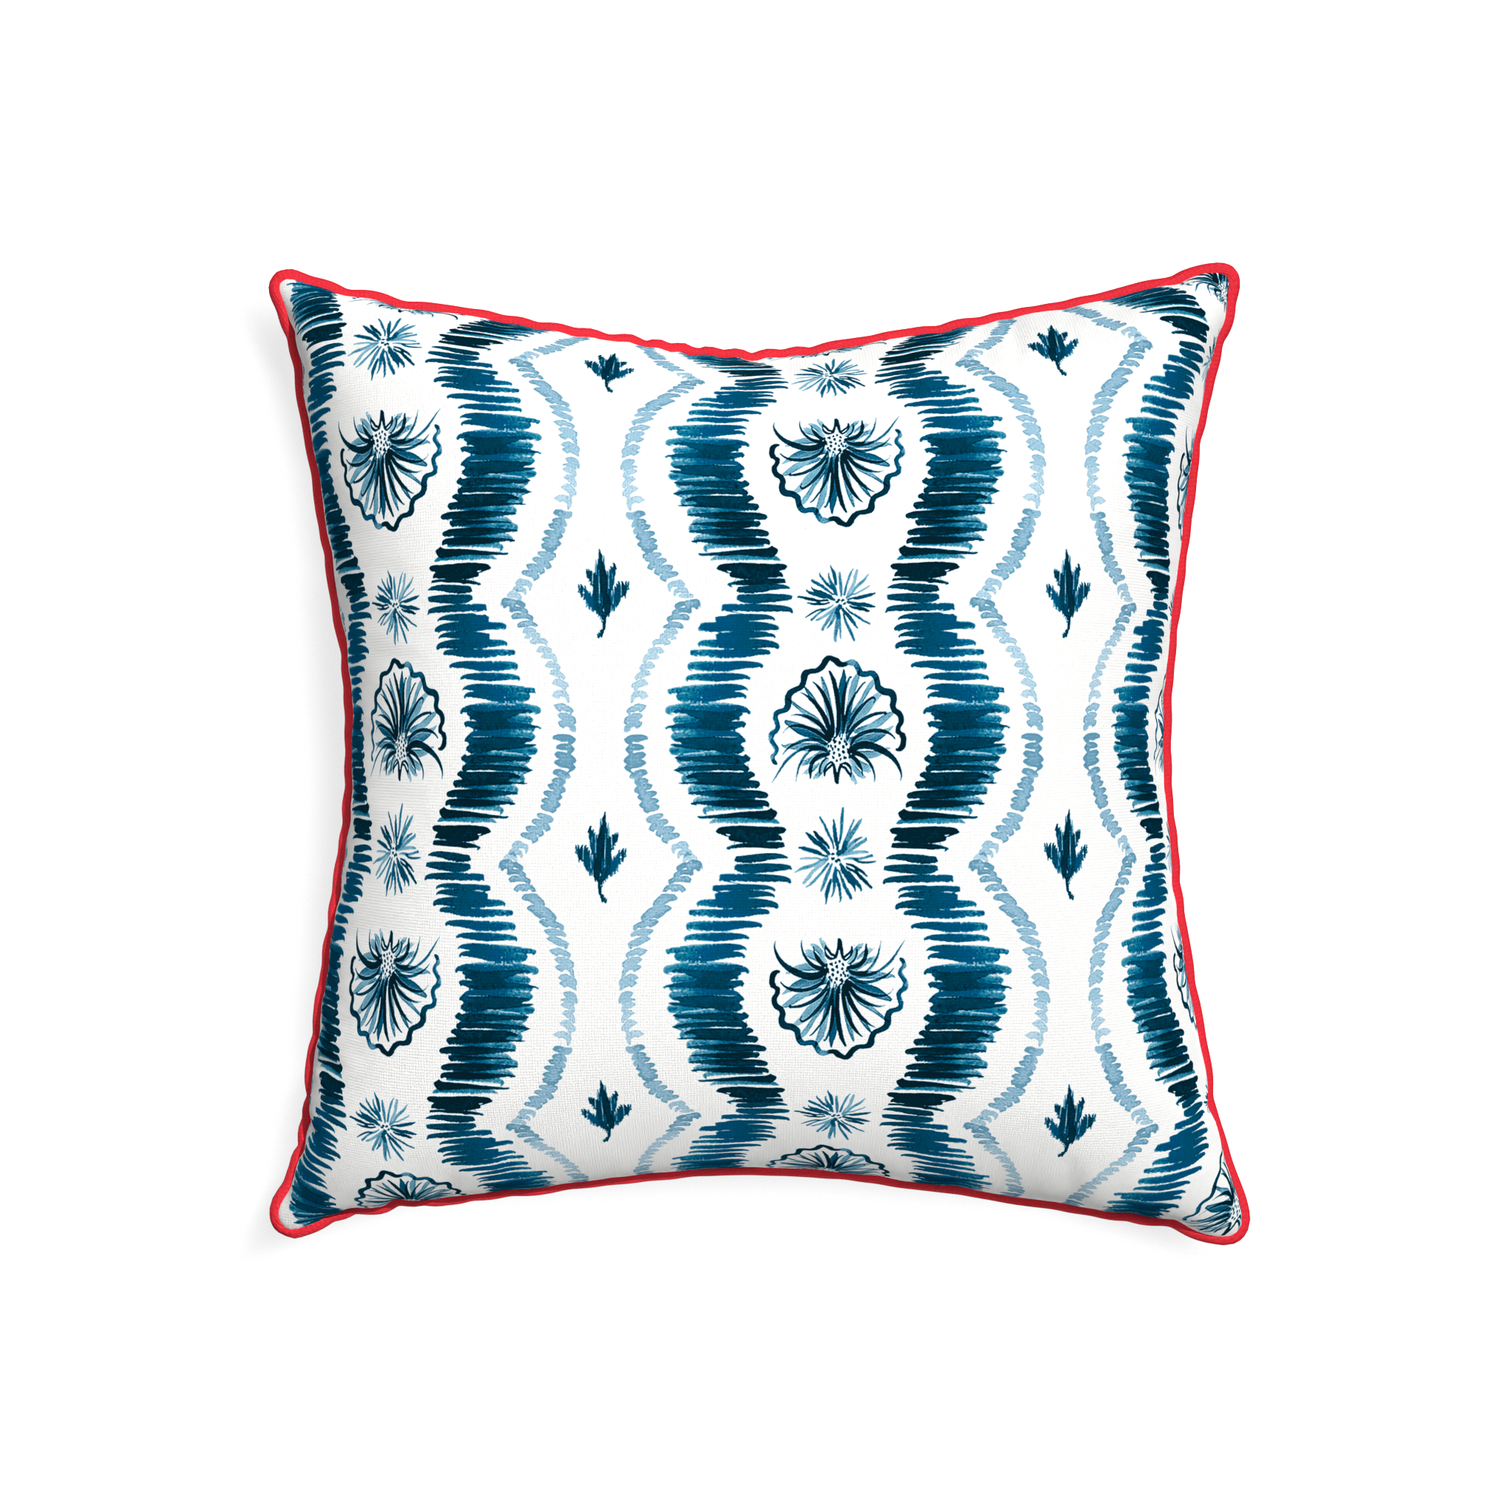 22-square alice custom blue ikatpillow with cherry piping on white background